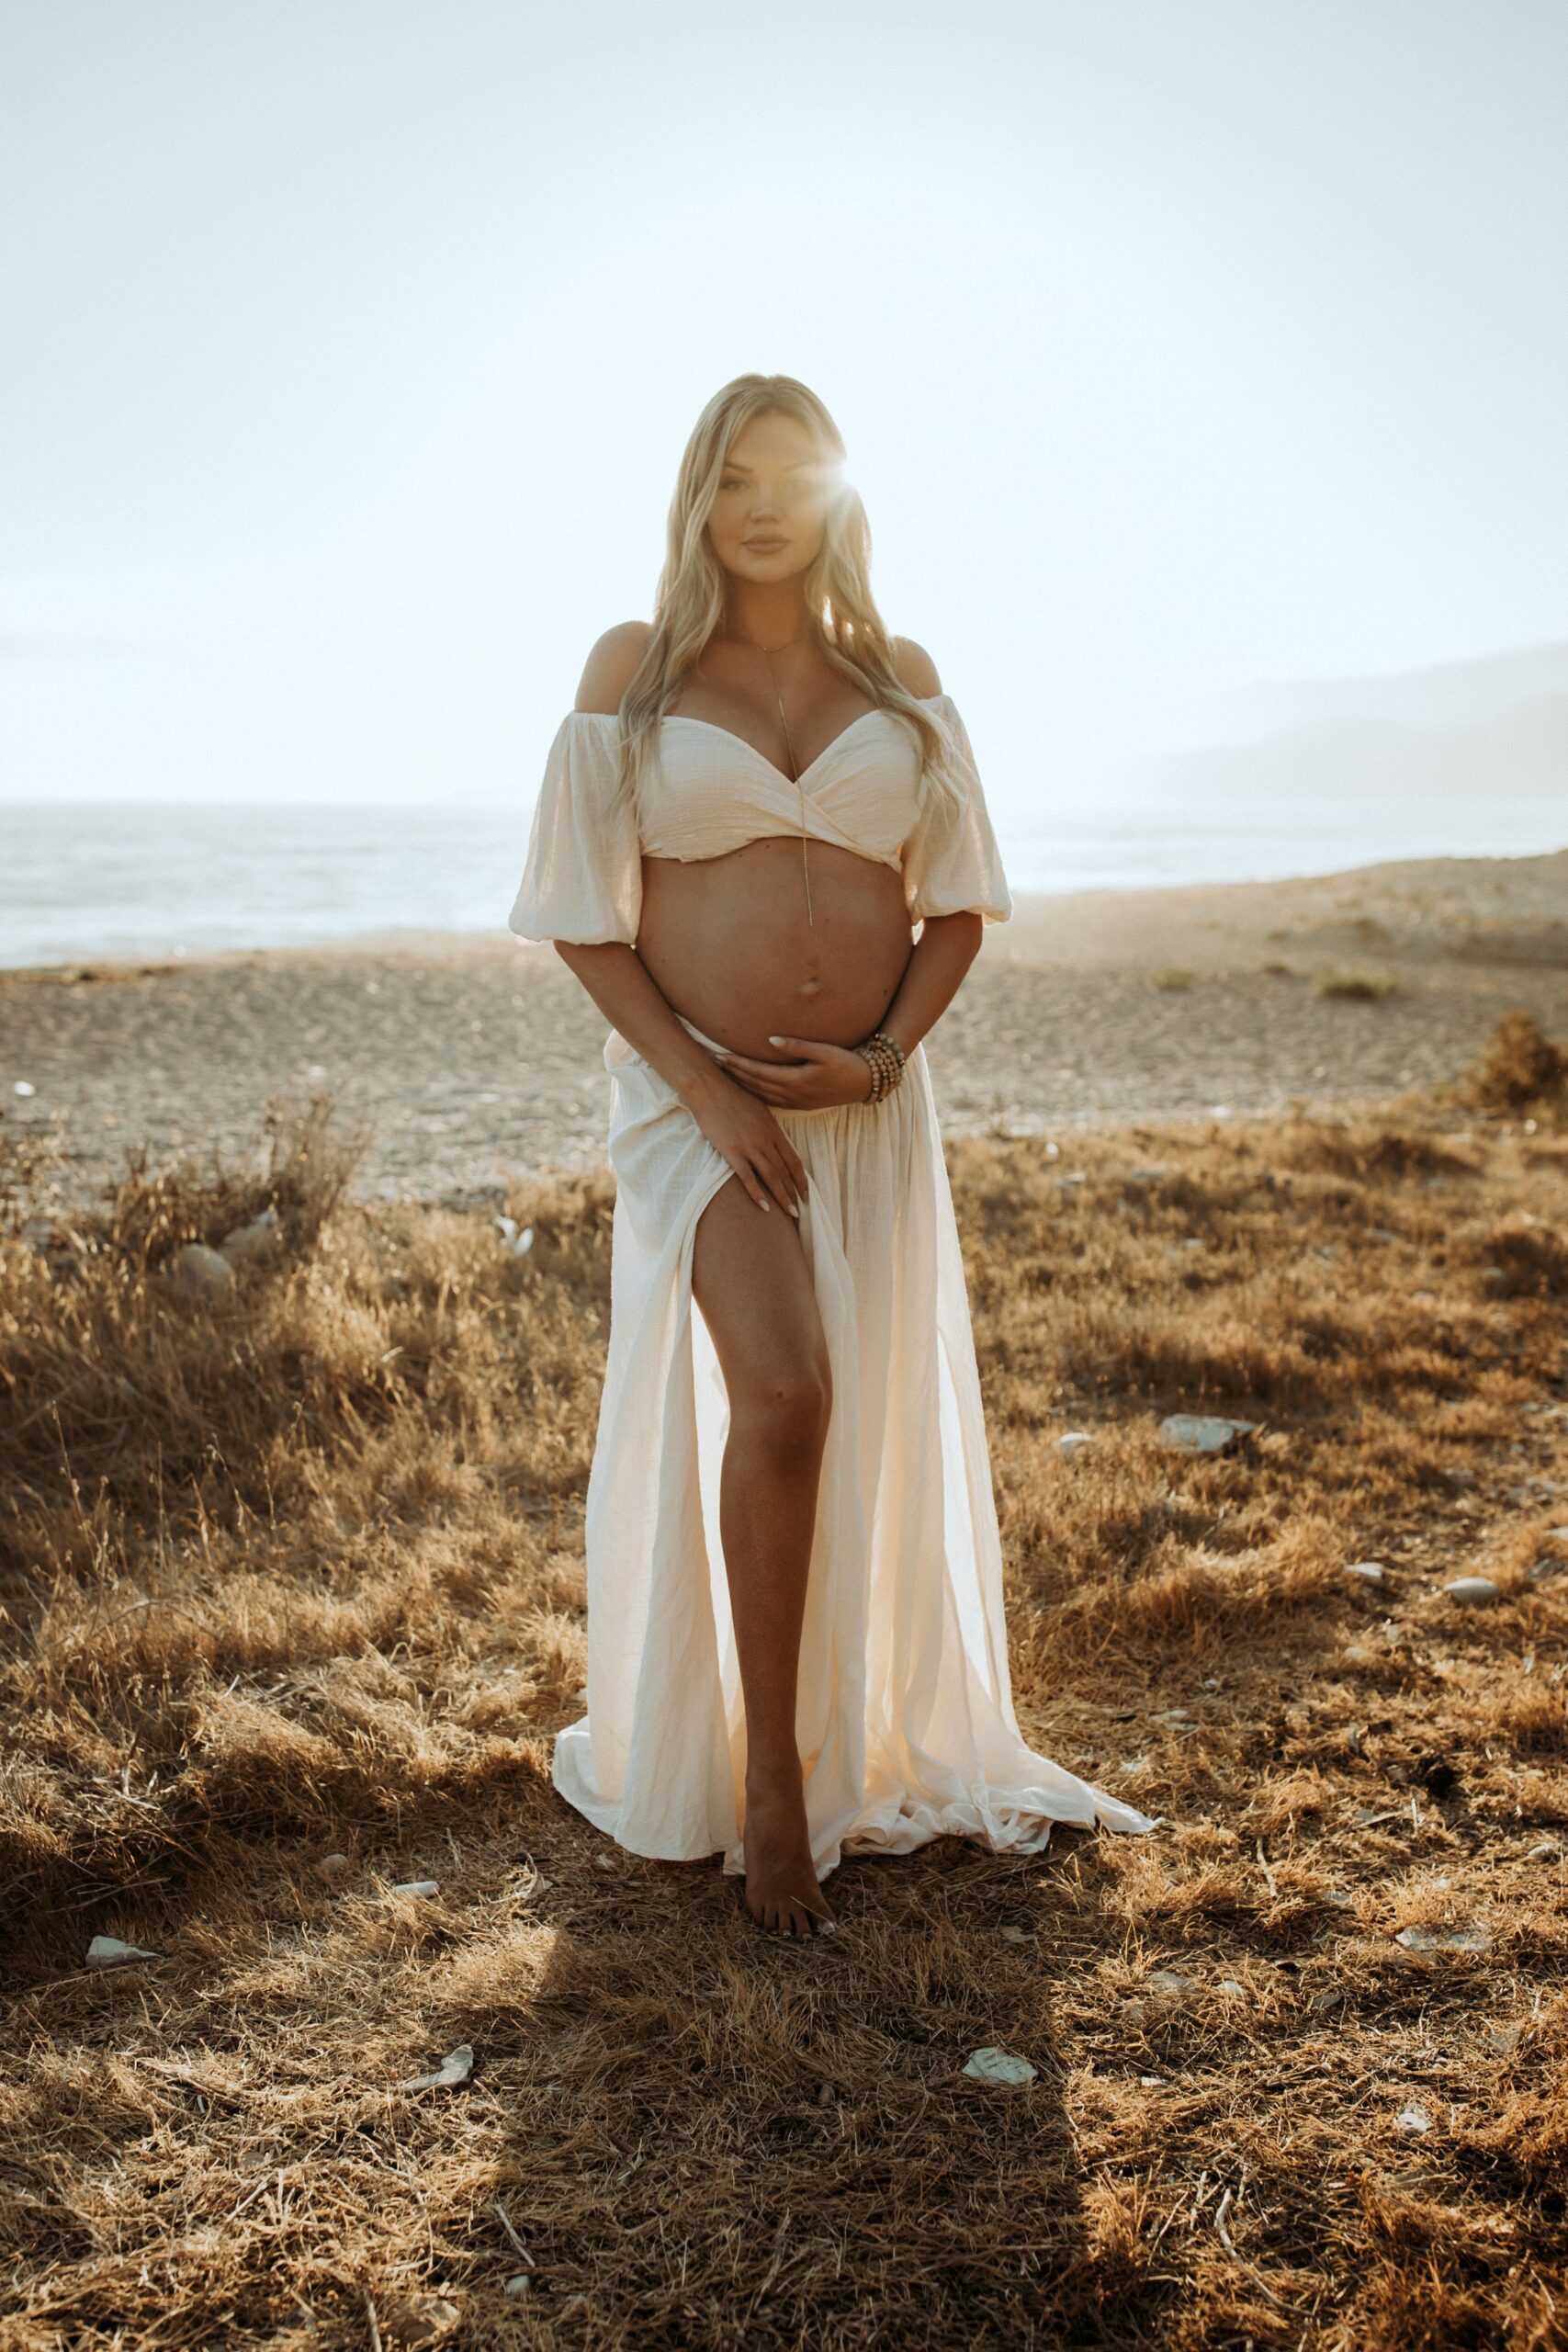 nuture-baby-photography-maternity-beach-session65.jpg